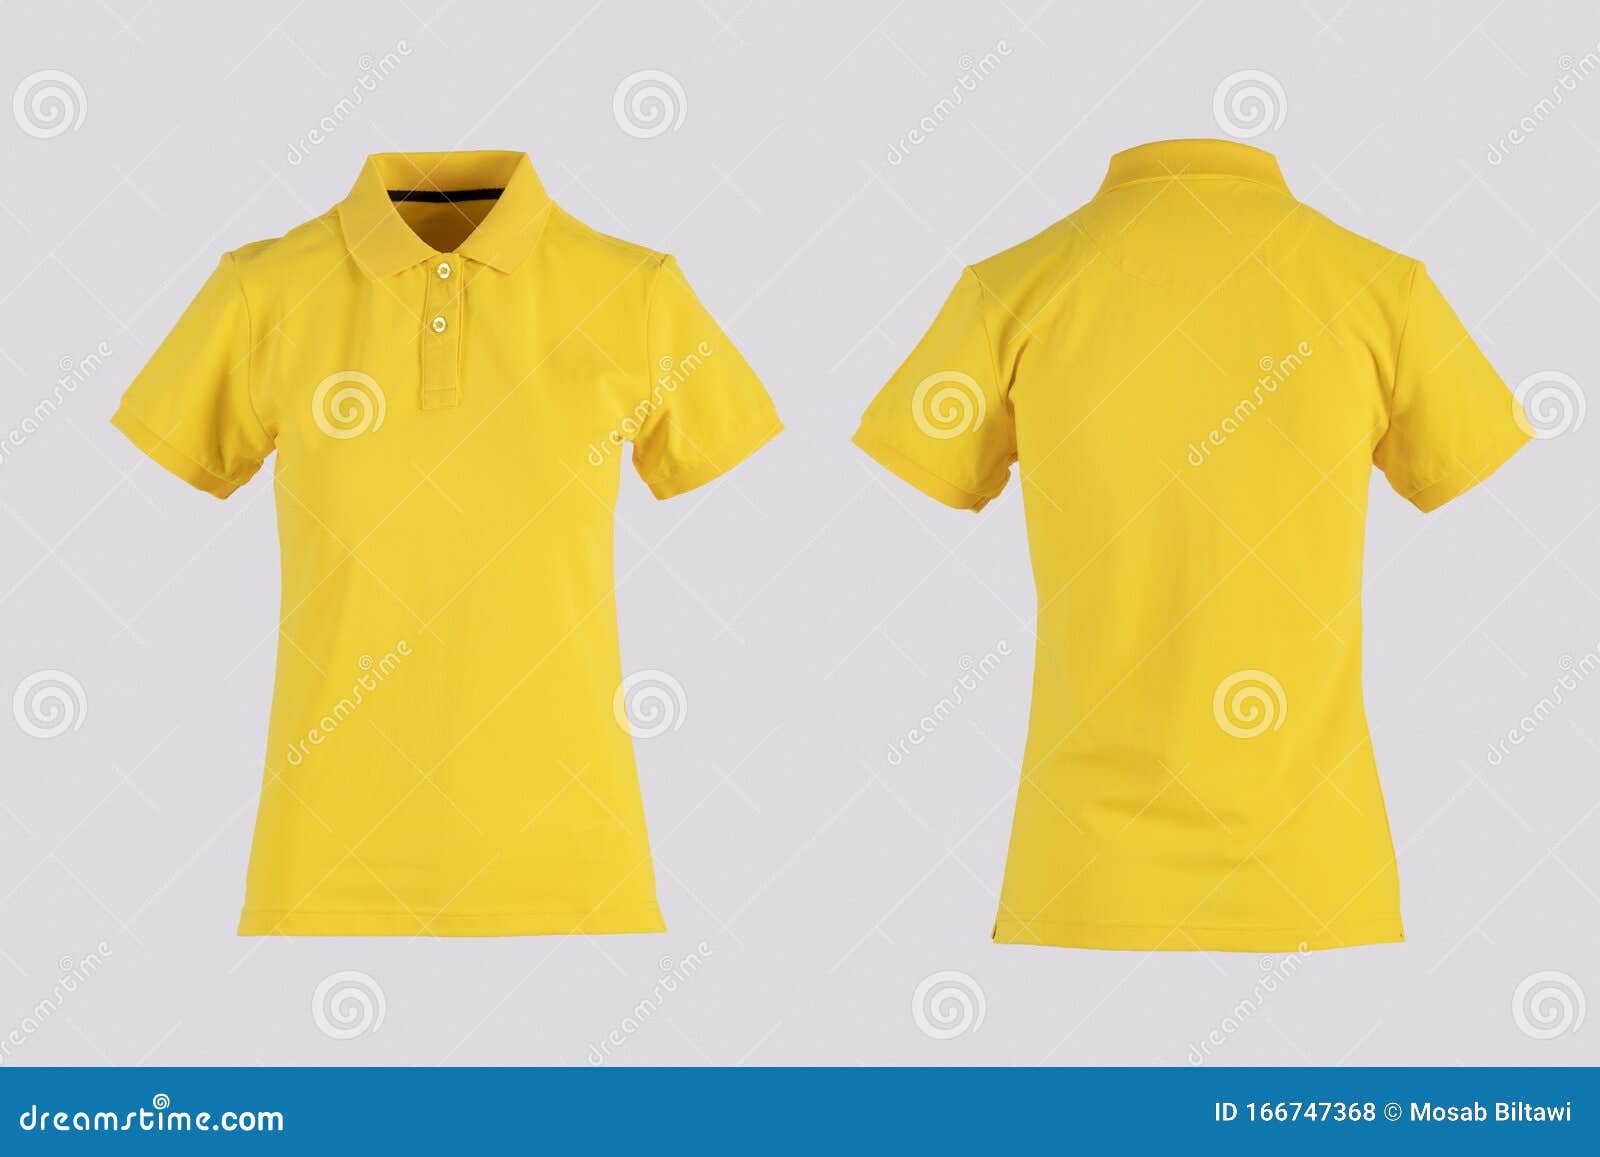 Download Yellow Womens Blank Polo Shirt, Front And Back View ...